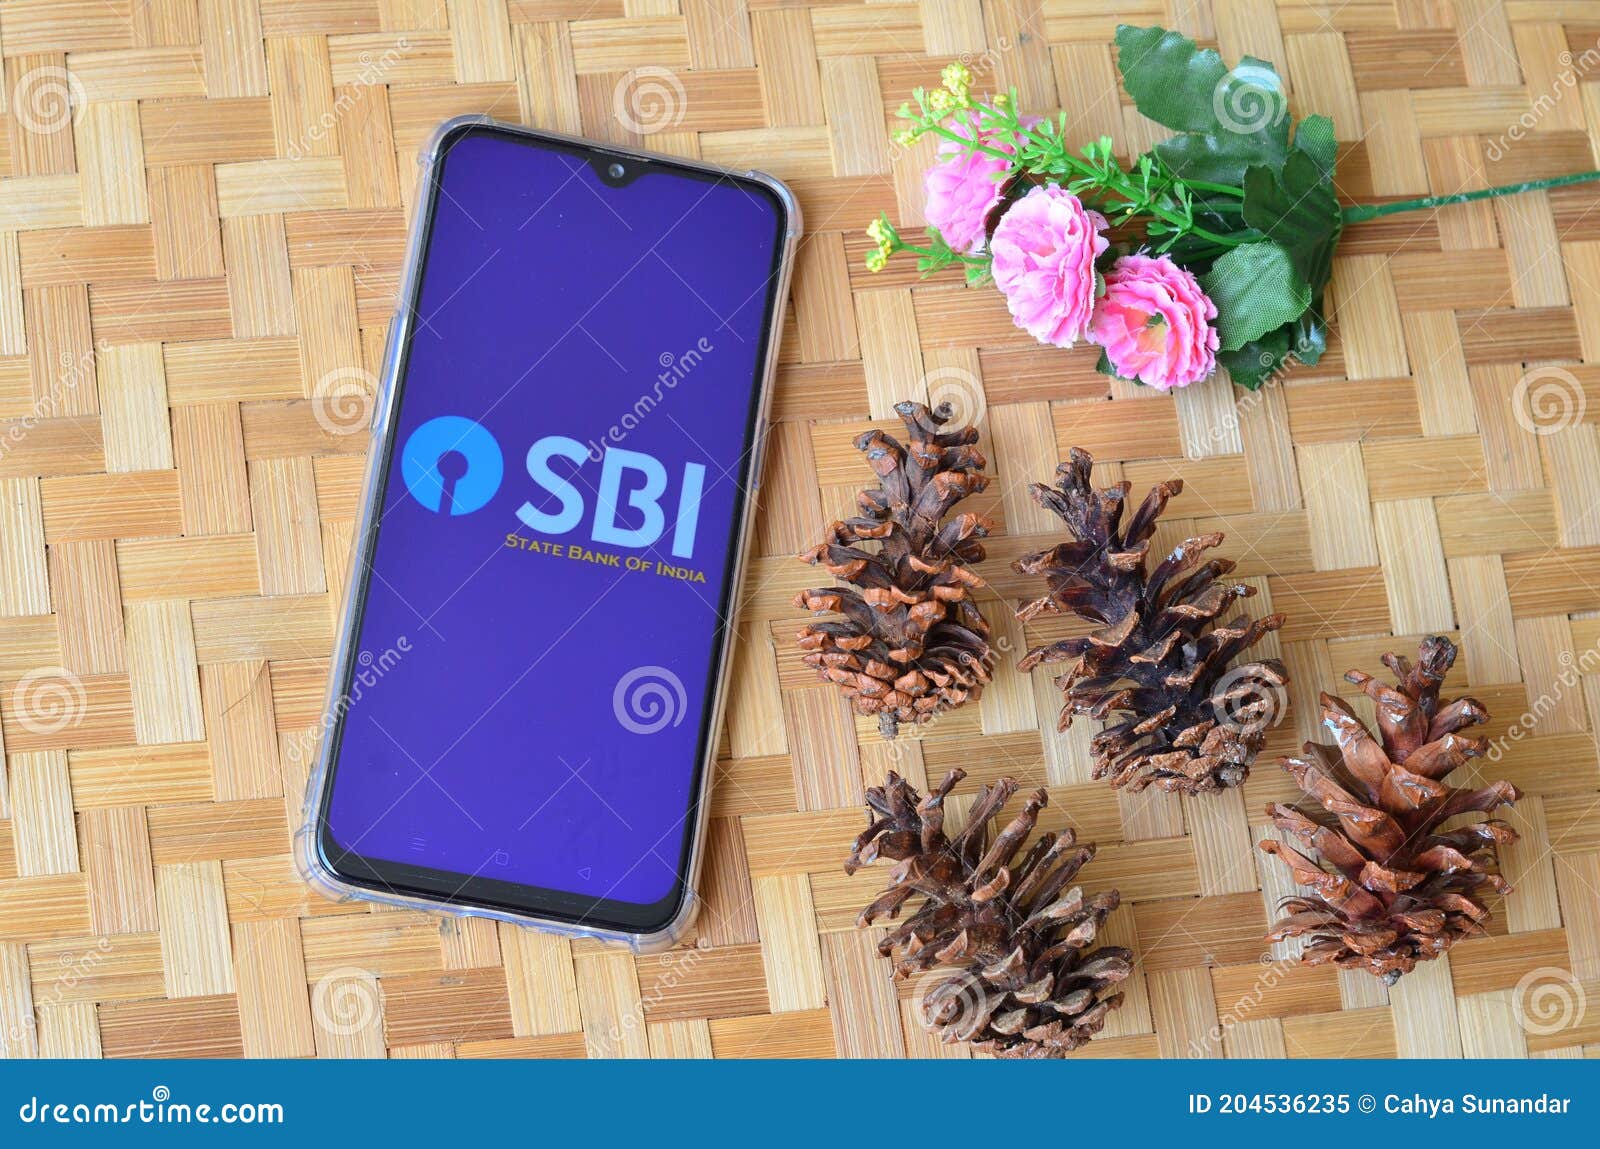 Sbi or State Bank of India, Popular Bank in India Editorial Image